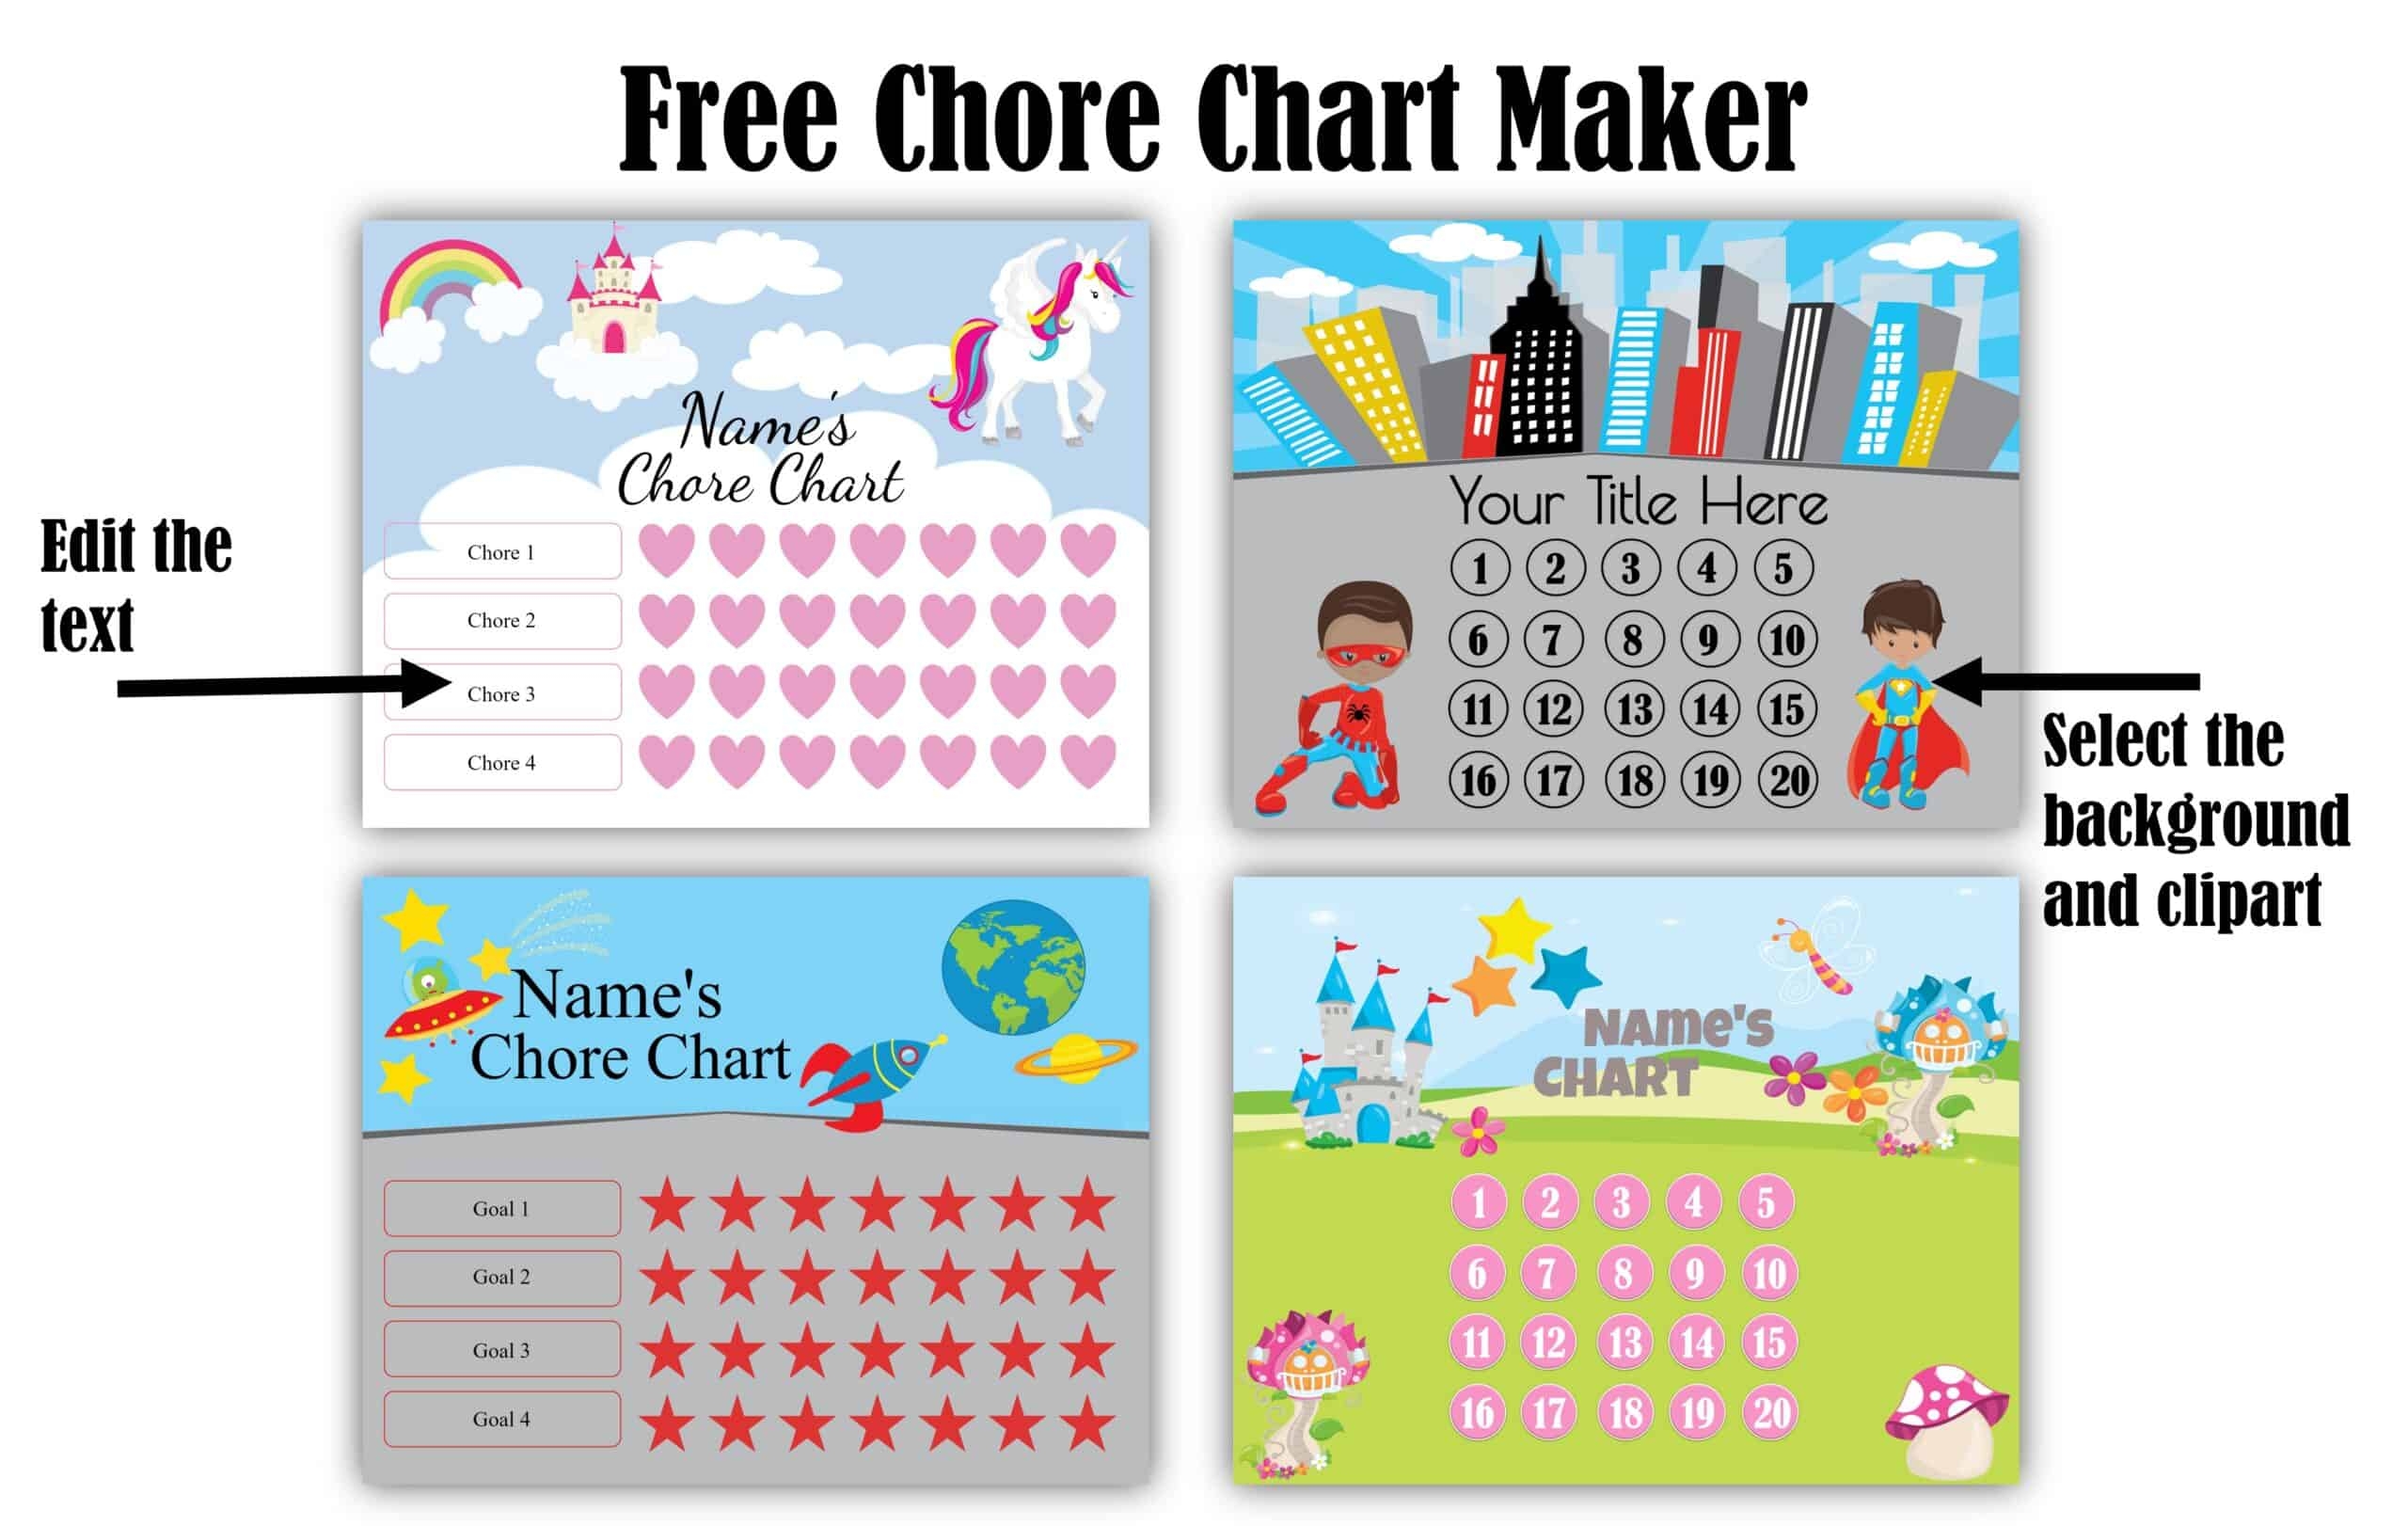 Chores For 7 Year Olds Chore List Free Chore Charts - Free Printable Chore Charts For 7 Year Olds